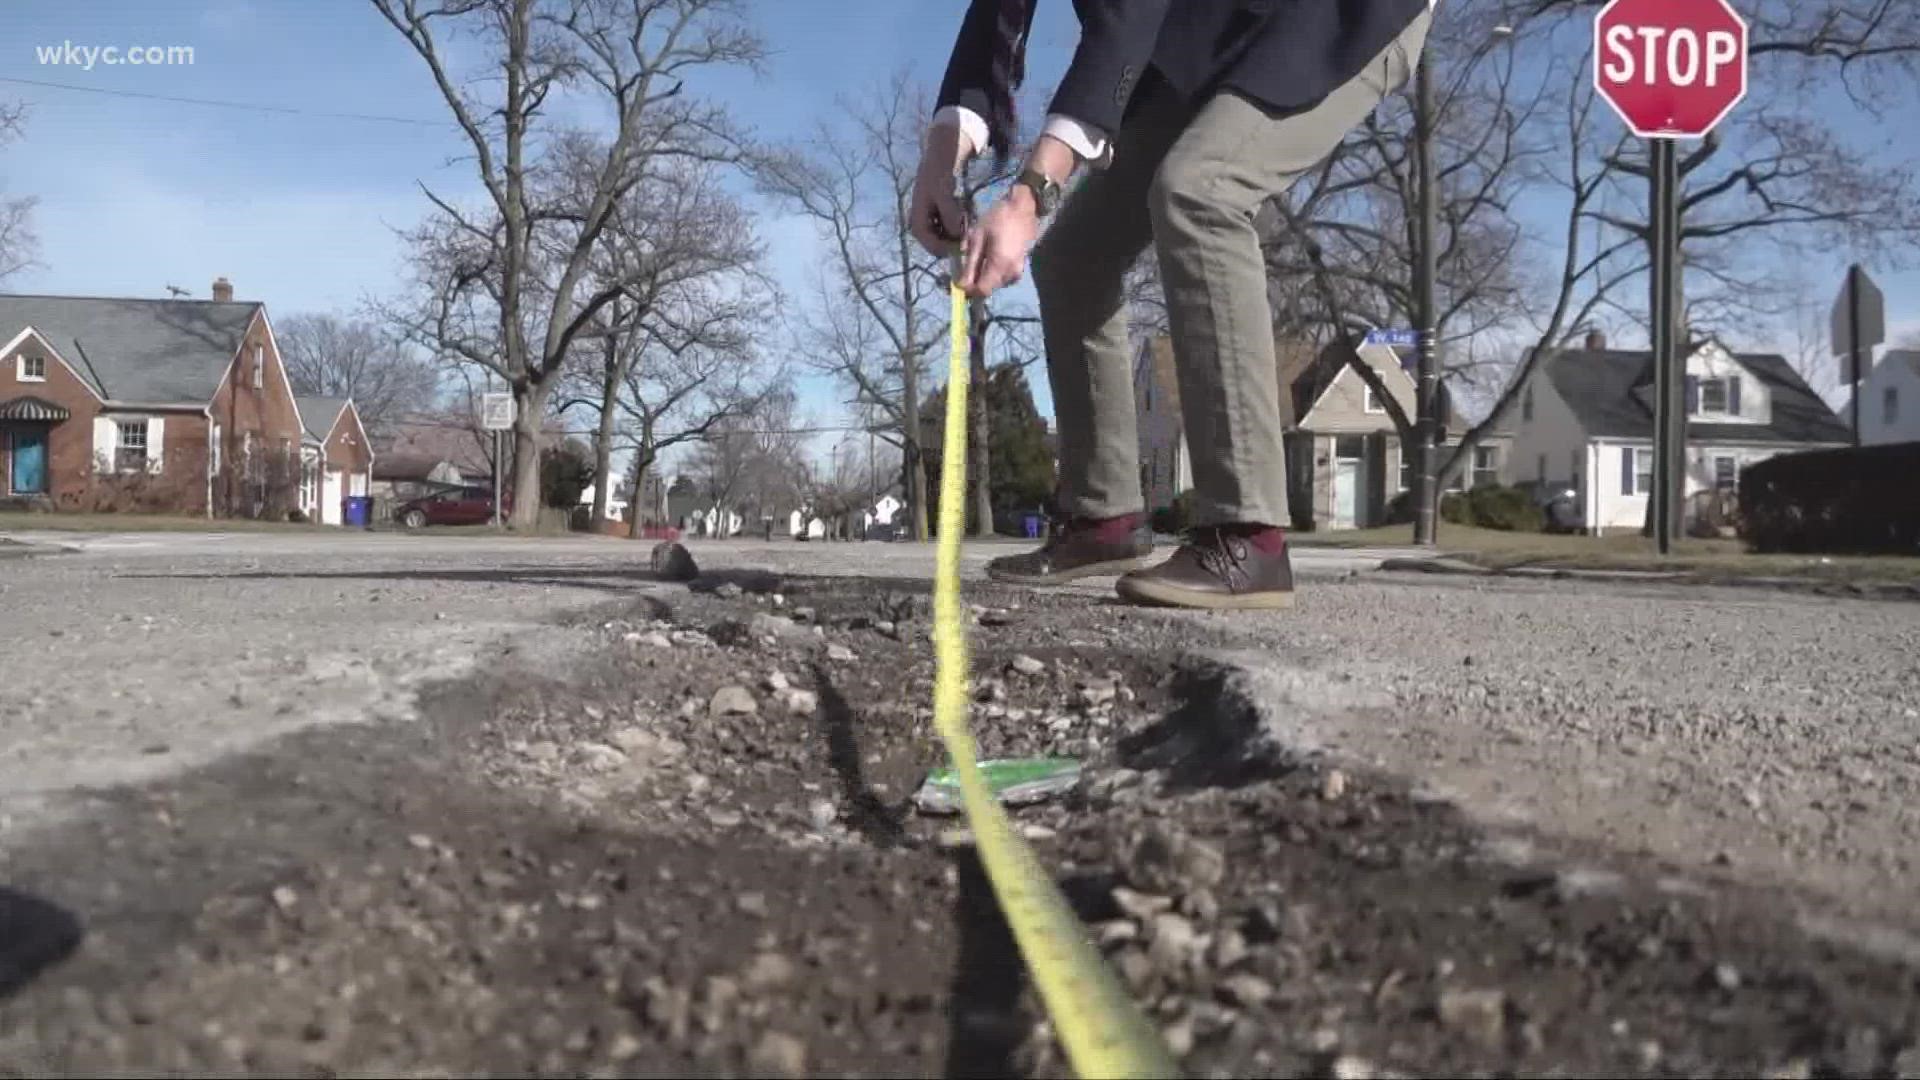 Mike set out to find the worst potholes in Northeast Ohio... and the city did not disappoint.